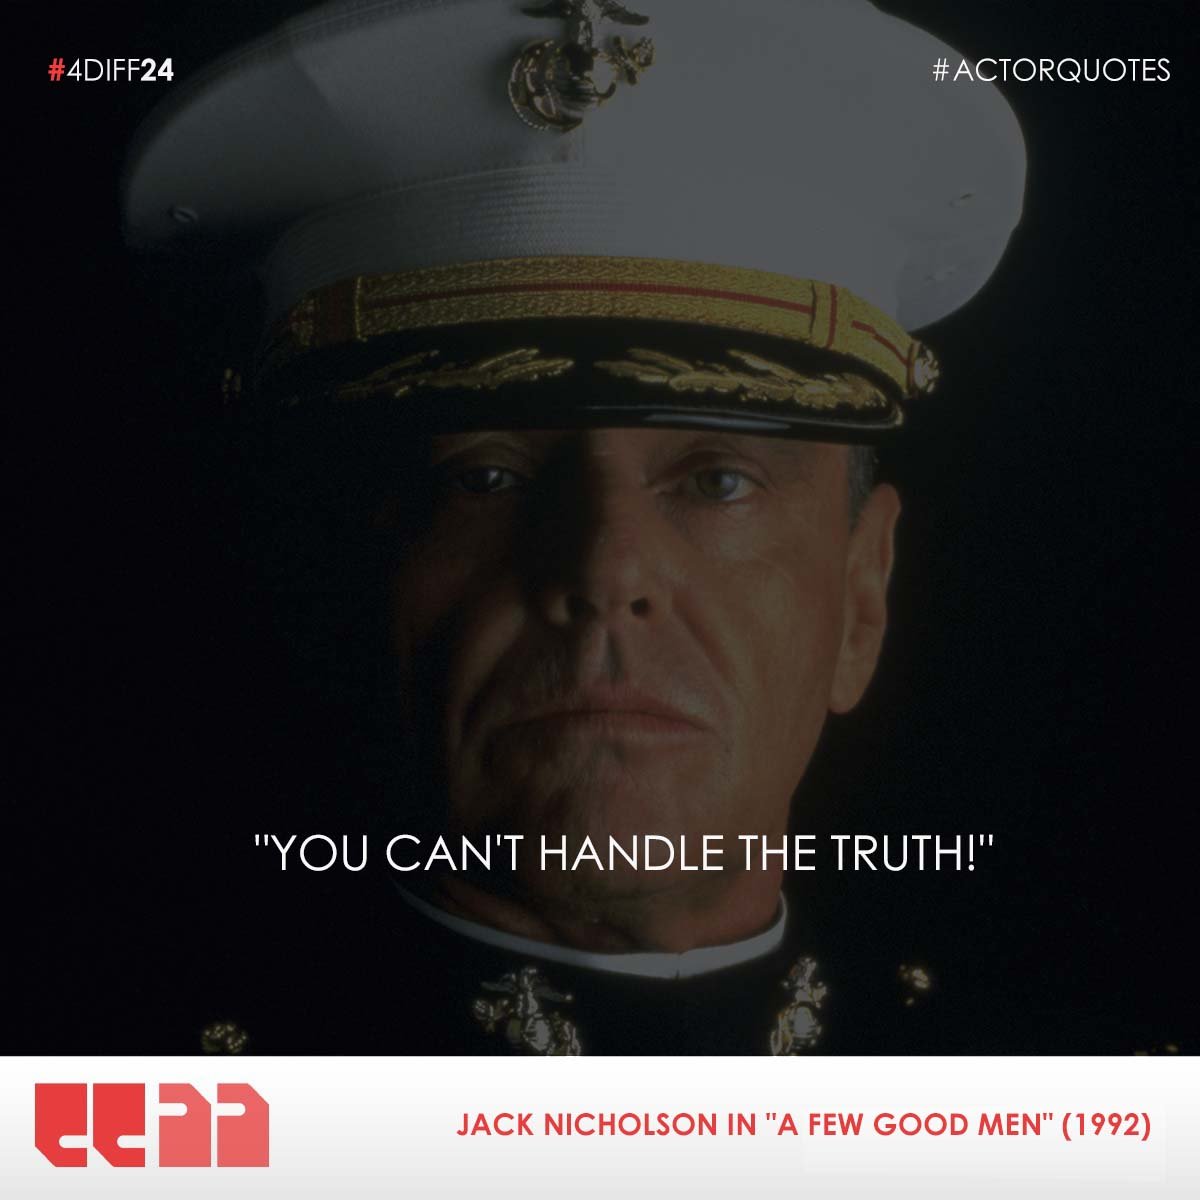 #fdiff24 #fdiff #actorquotes #quotes #dailypost

'You can't handle the truth! - Jack Nicholson